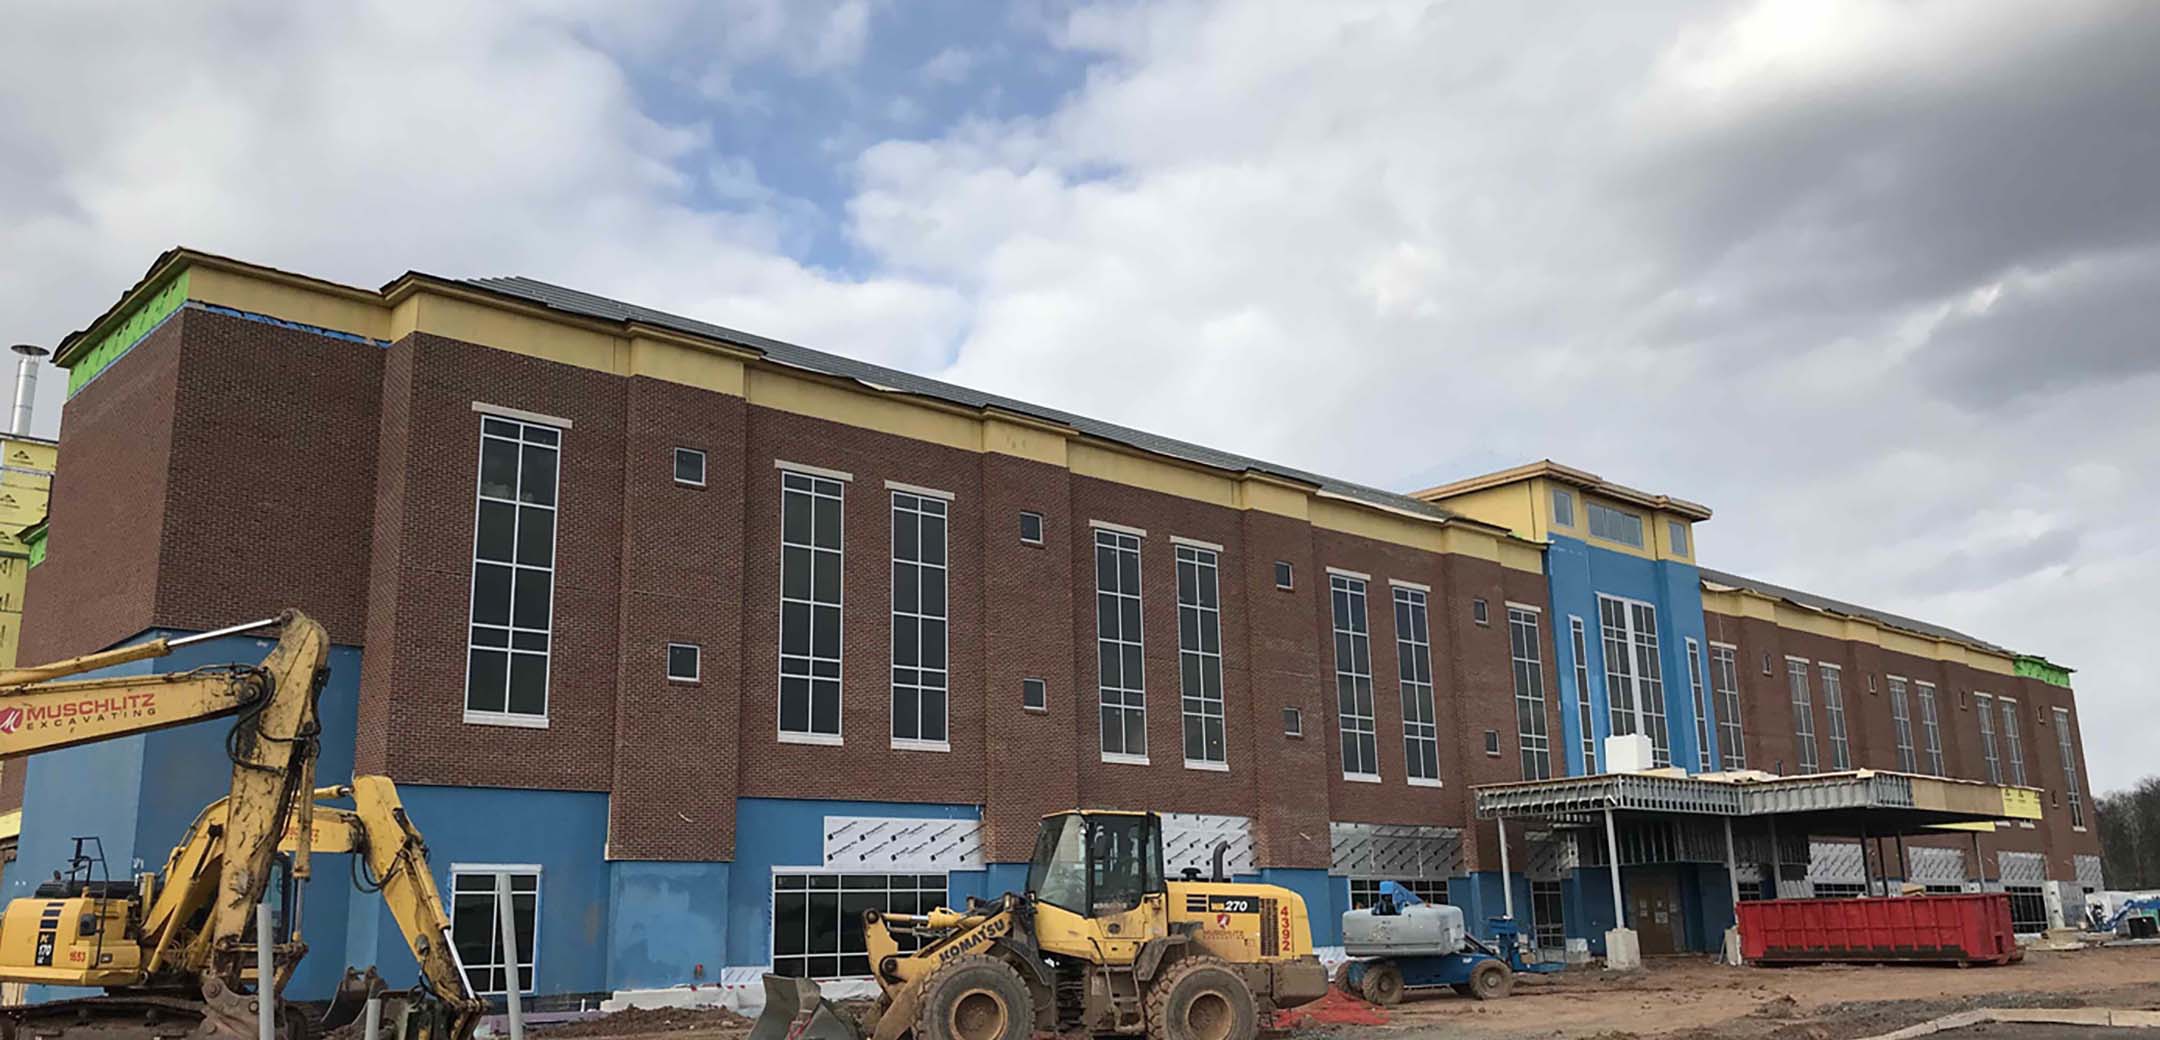 An angled view of the St Luke's Quarter red brick building showcasing the insulation application and construction process.